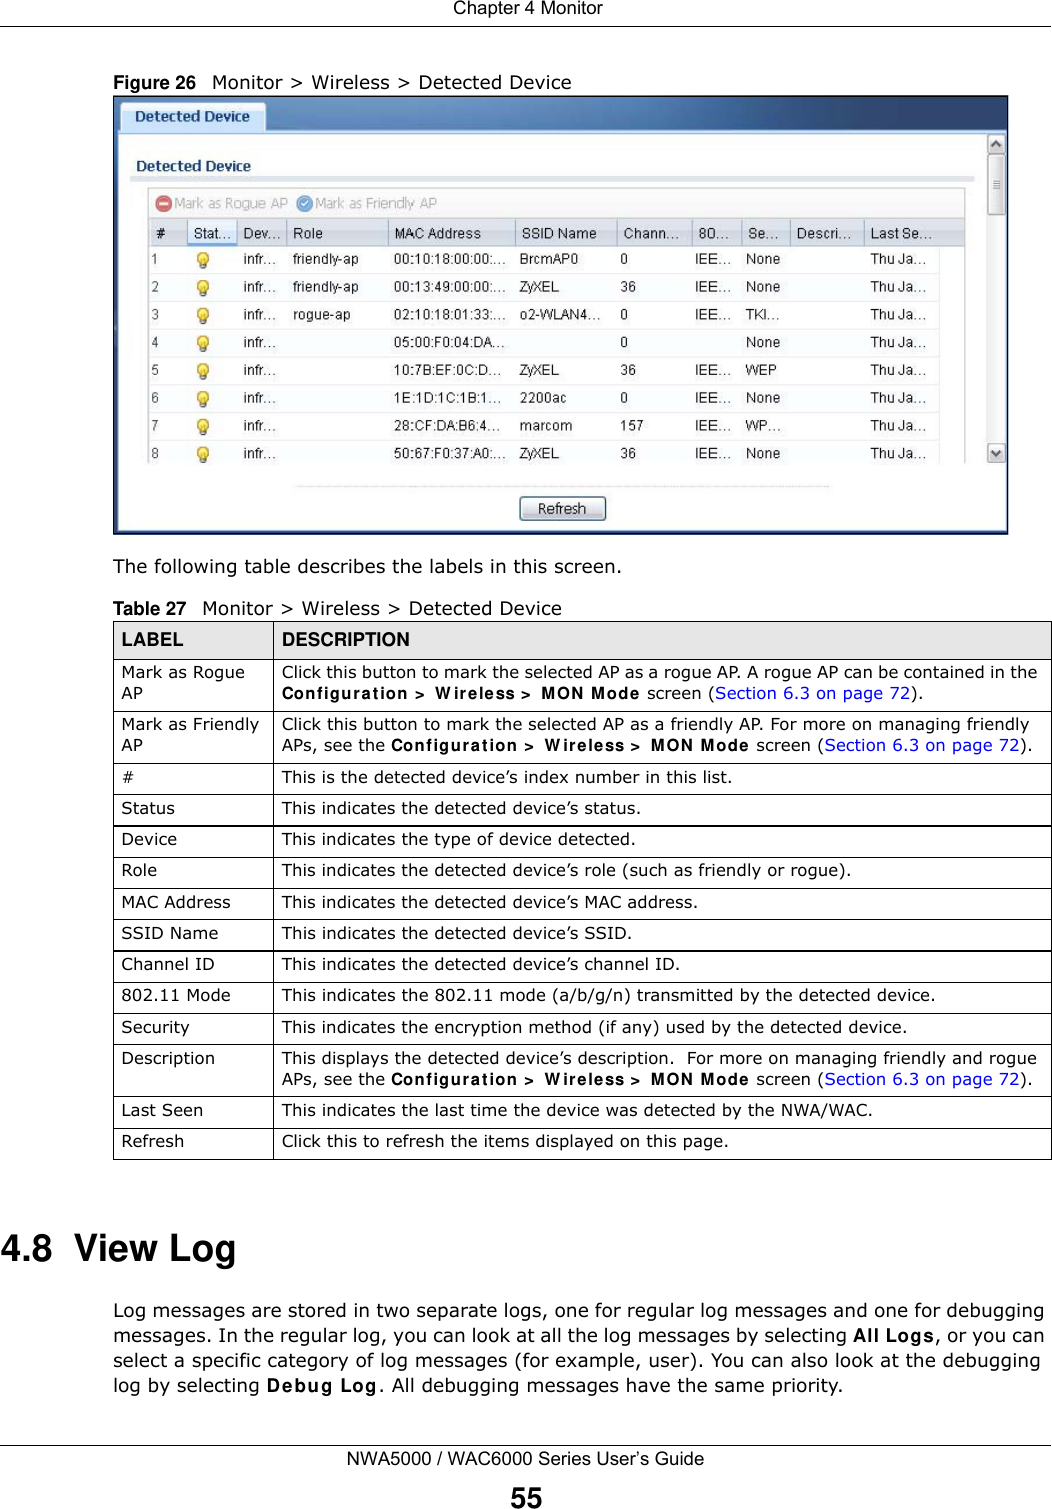  Chapter 4 MonitorNWA5000 / WAC6000 Series User’s Guide55Figure 26   Monitor &gt; Wireless &gt; Detected Device  The following table describes the labels in this screen. 4.8  View LogLog messages are stored in two separate logs, one for regular log messages and one for debugging messages. In the regular log, you can look at all the log messages by selecting All Logs, or you can select a specific category of log messages (for example, user). You can also look at the debugging log by selecting De bug Log. All debugging messages have the same priority. Table 27   Monitor &gt; Wireless &gt; Detected DeviceLABEL DESCRIPTIONMark as Rogue APClick this button to mark the selected AP as a rogue AP. A rogue AP can be contained in the Configurat ion &gt;  W ireless &gt;  M ON  M ode screen (Section 6.3 on page 72).Mark as Friendly APClick this button to mark the selected AP as a friendly AP. For more on managing friendly APs, see the Configur a tion &gt;  W ir eless &gt;  MON  M ode  screen (Section 6.3 on page 72).# This is the detected device’s index number in this list.Status This indicates the detected device’s status.Device This indicates the type of device detected.Role This indicates the detected device’s role (such as friendly or rogue).MAC Address This indicates the detected device’s MAC address.SSID Name This indicates the detected device’s SSID.Channel ID This indicates the detected device’s channel ID.802.11 Mode This indicates the 802.11 mode (a/b/g/n) transmitted by the detected device.Security This indicates the encryption method (if any) used by the detected device.Description This displays the detected device’s description.  For more on managing friendly and rogue APs, see the Configur a tion &gt;  W ir eless &gt;  MON  M ode  screen (Section 6.3 on page 72).Last Seen This indicates the last time the device was detected by the NWA/WAC.Refresh Click this to refresh the items displayed on this page.